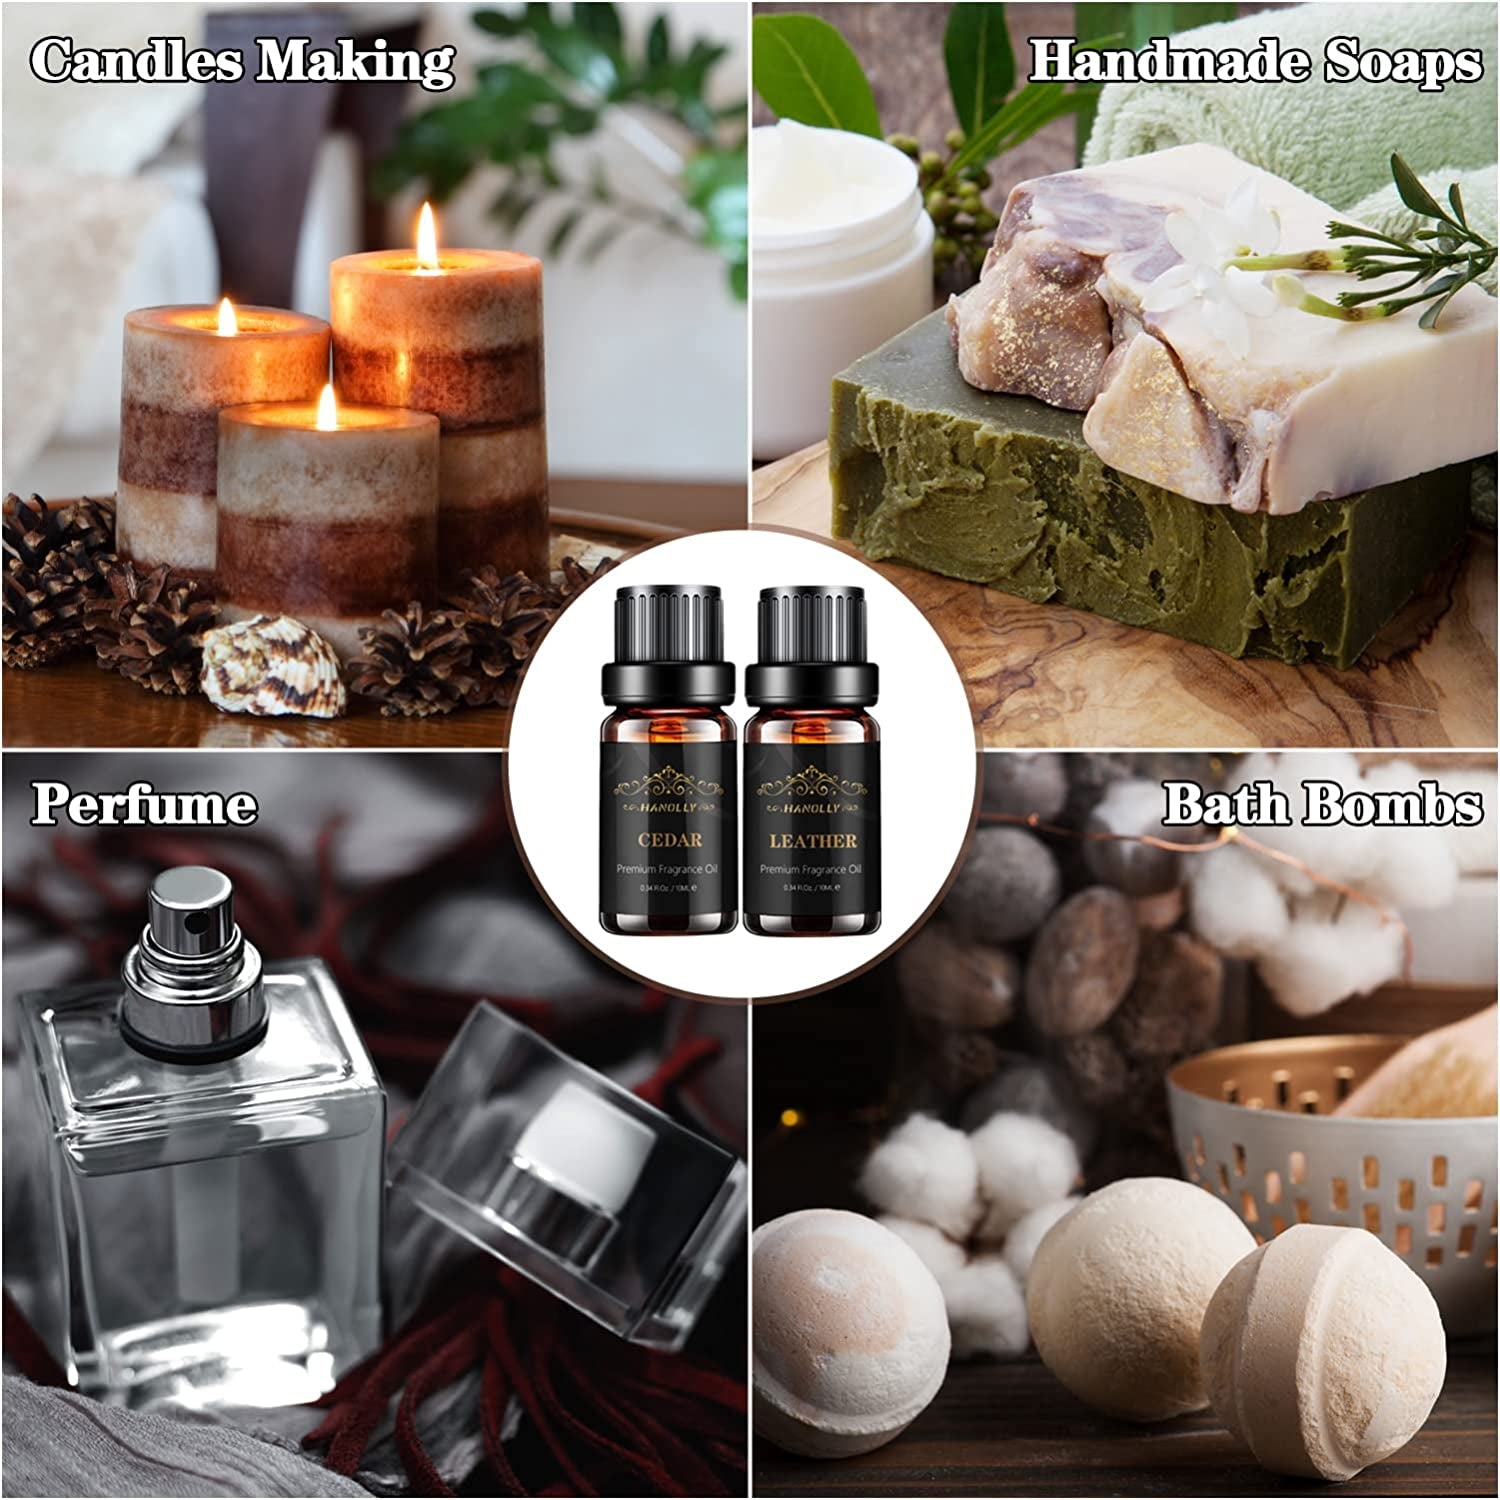 Essential Oils Set, Men Scents Fragrance Oil Aromatherapy Essential Oils Kit for Diffuser (6X10Ml) - Sandalwood, Cedar, Leather, Sweet Tobacco, Rum, Cologne Aromatherapy Oils for Men